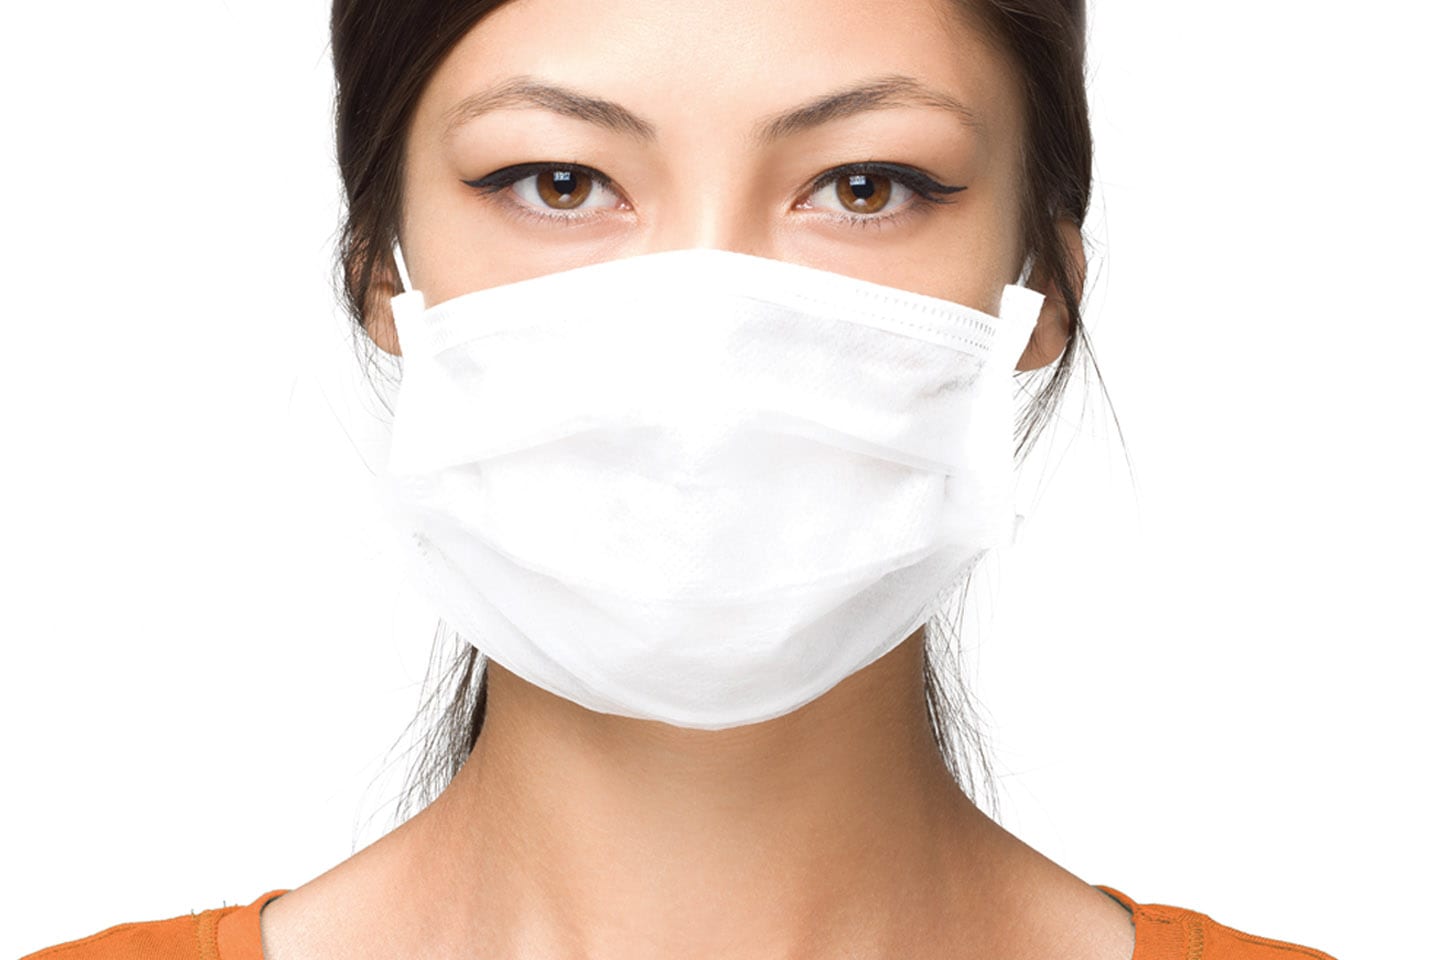 woman wearing medical face mask to prevent spread of germs chattanooga